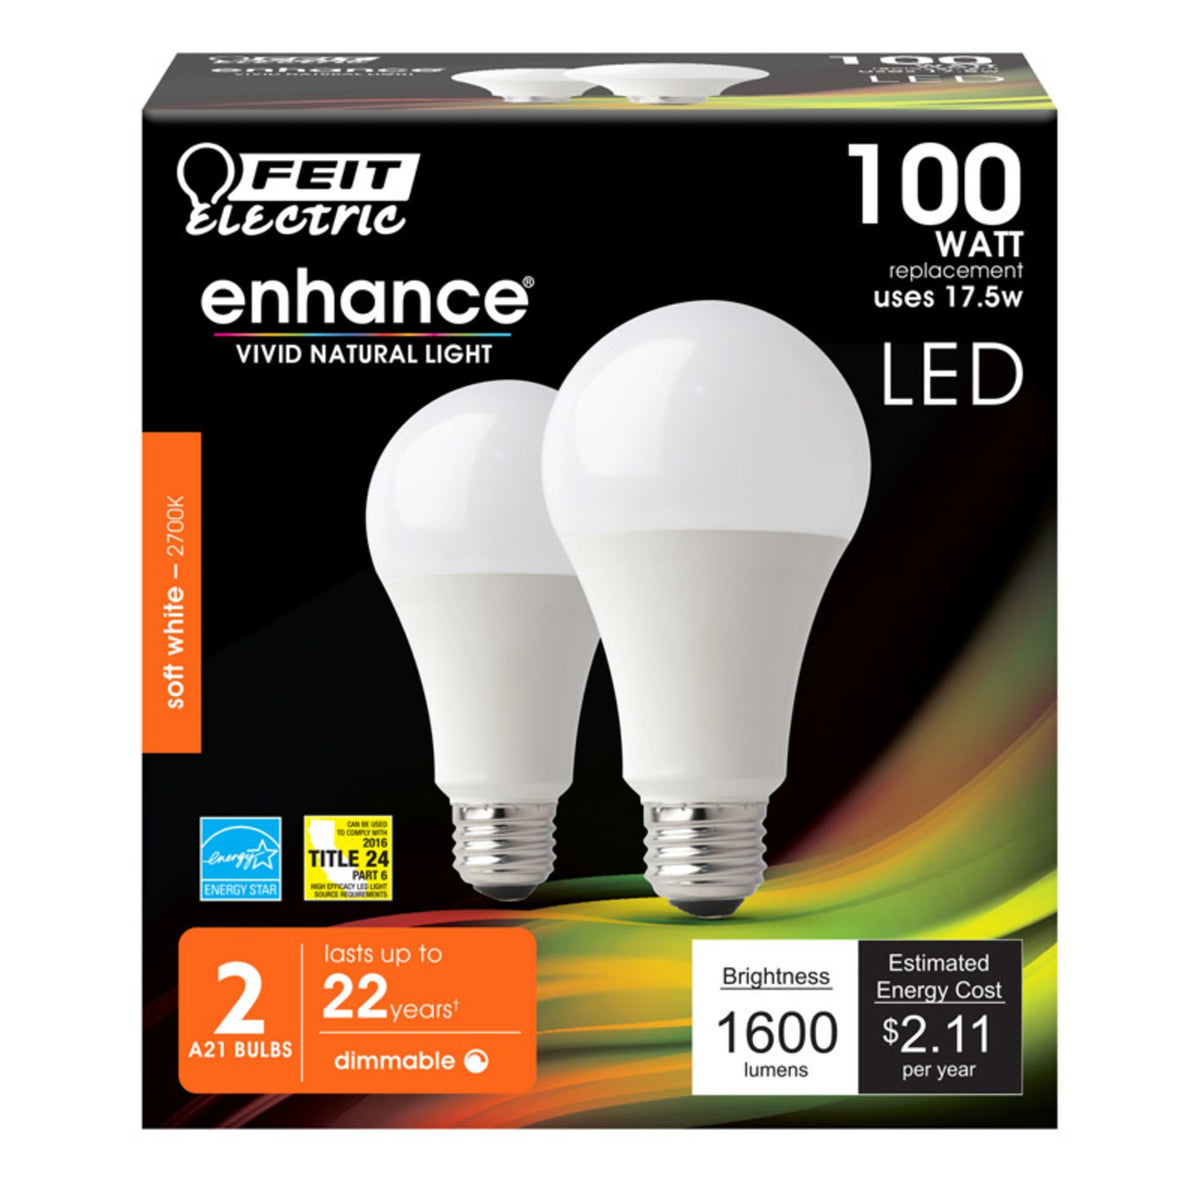 FEIT Electric OM100DM/927CA/2 Dimmable LED Light Bulb, 17.5 Watts